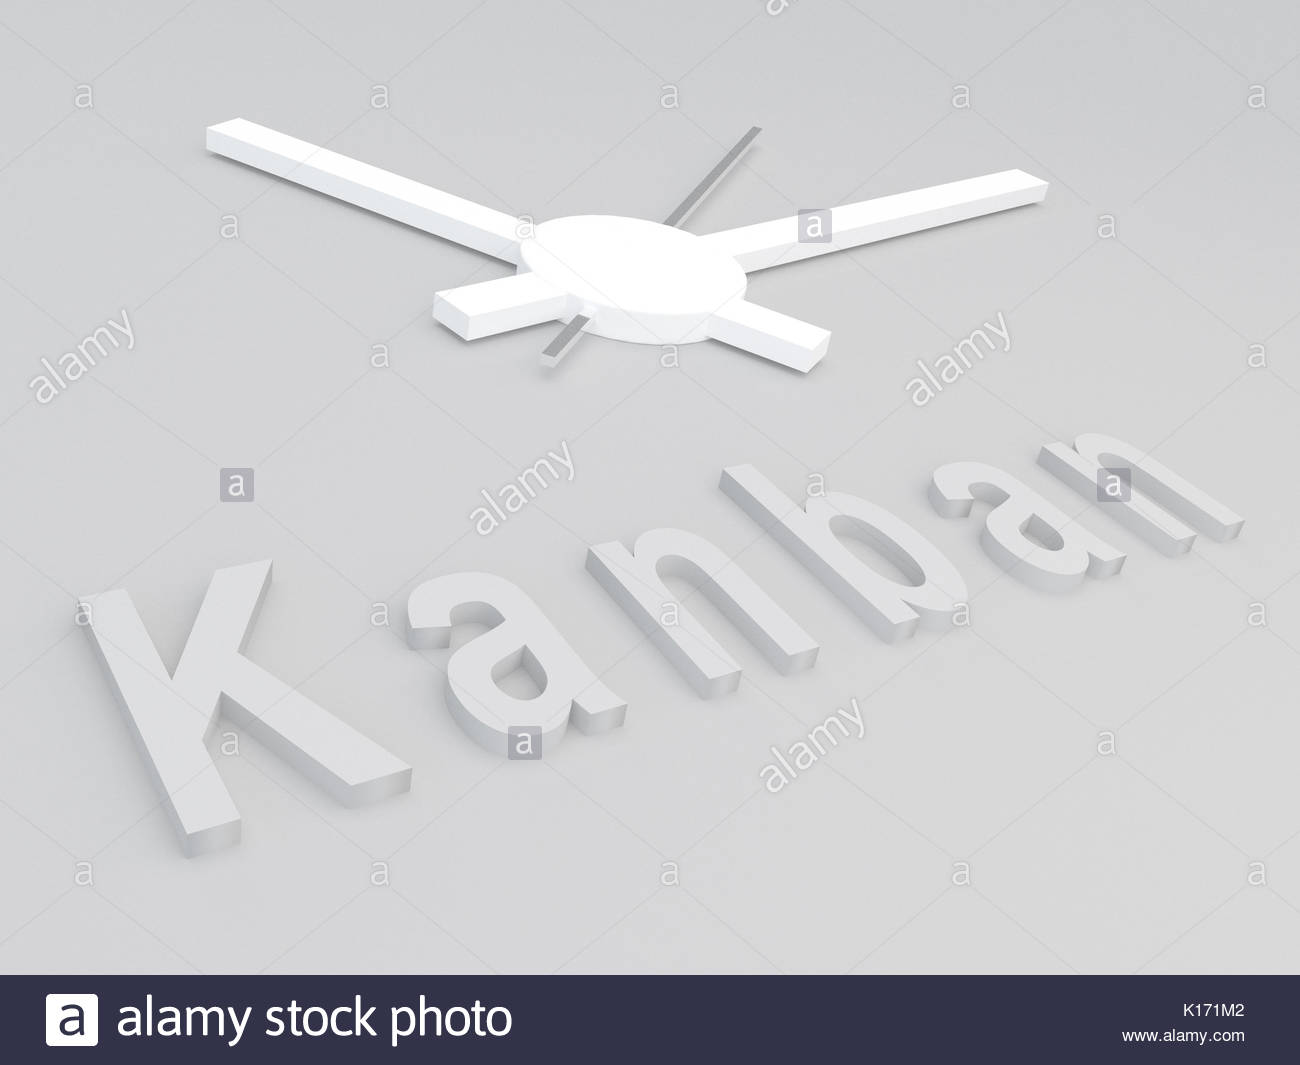 3d Illustration Of Kanban Title With A Clock As Background